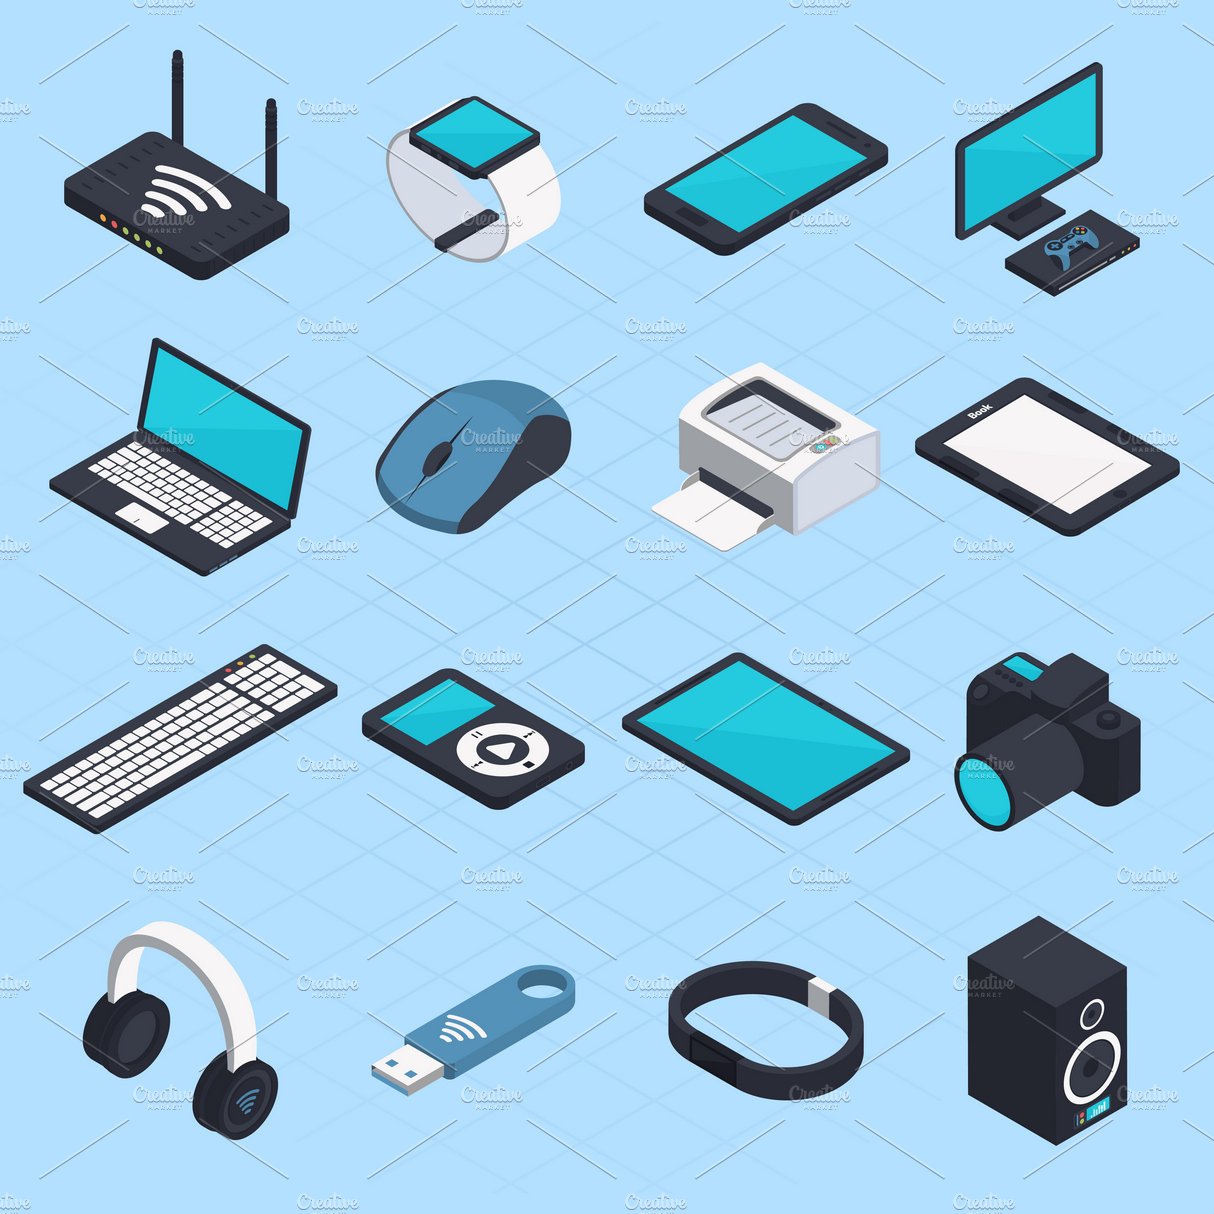 Isometric wireless mobile devices cover image.